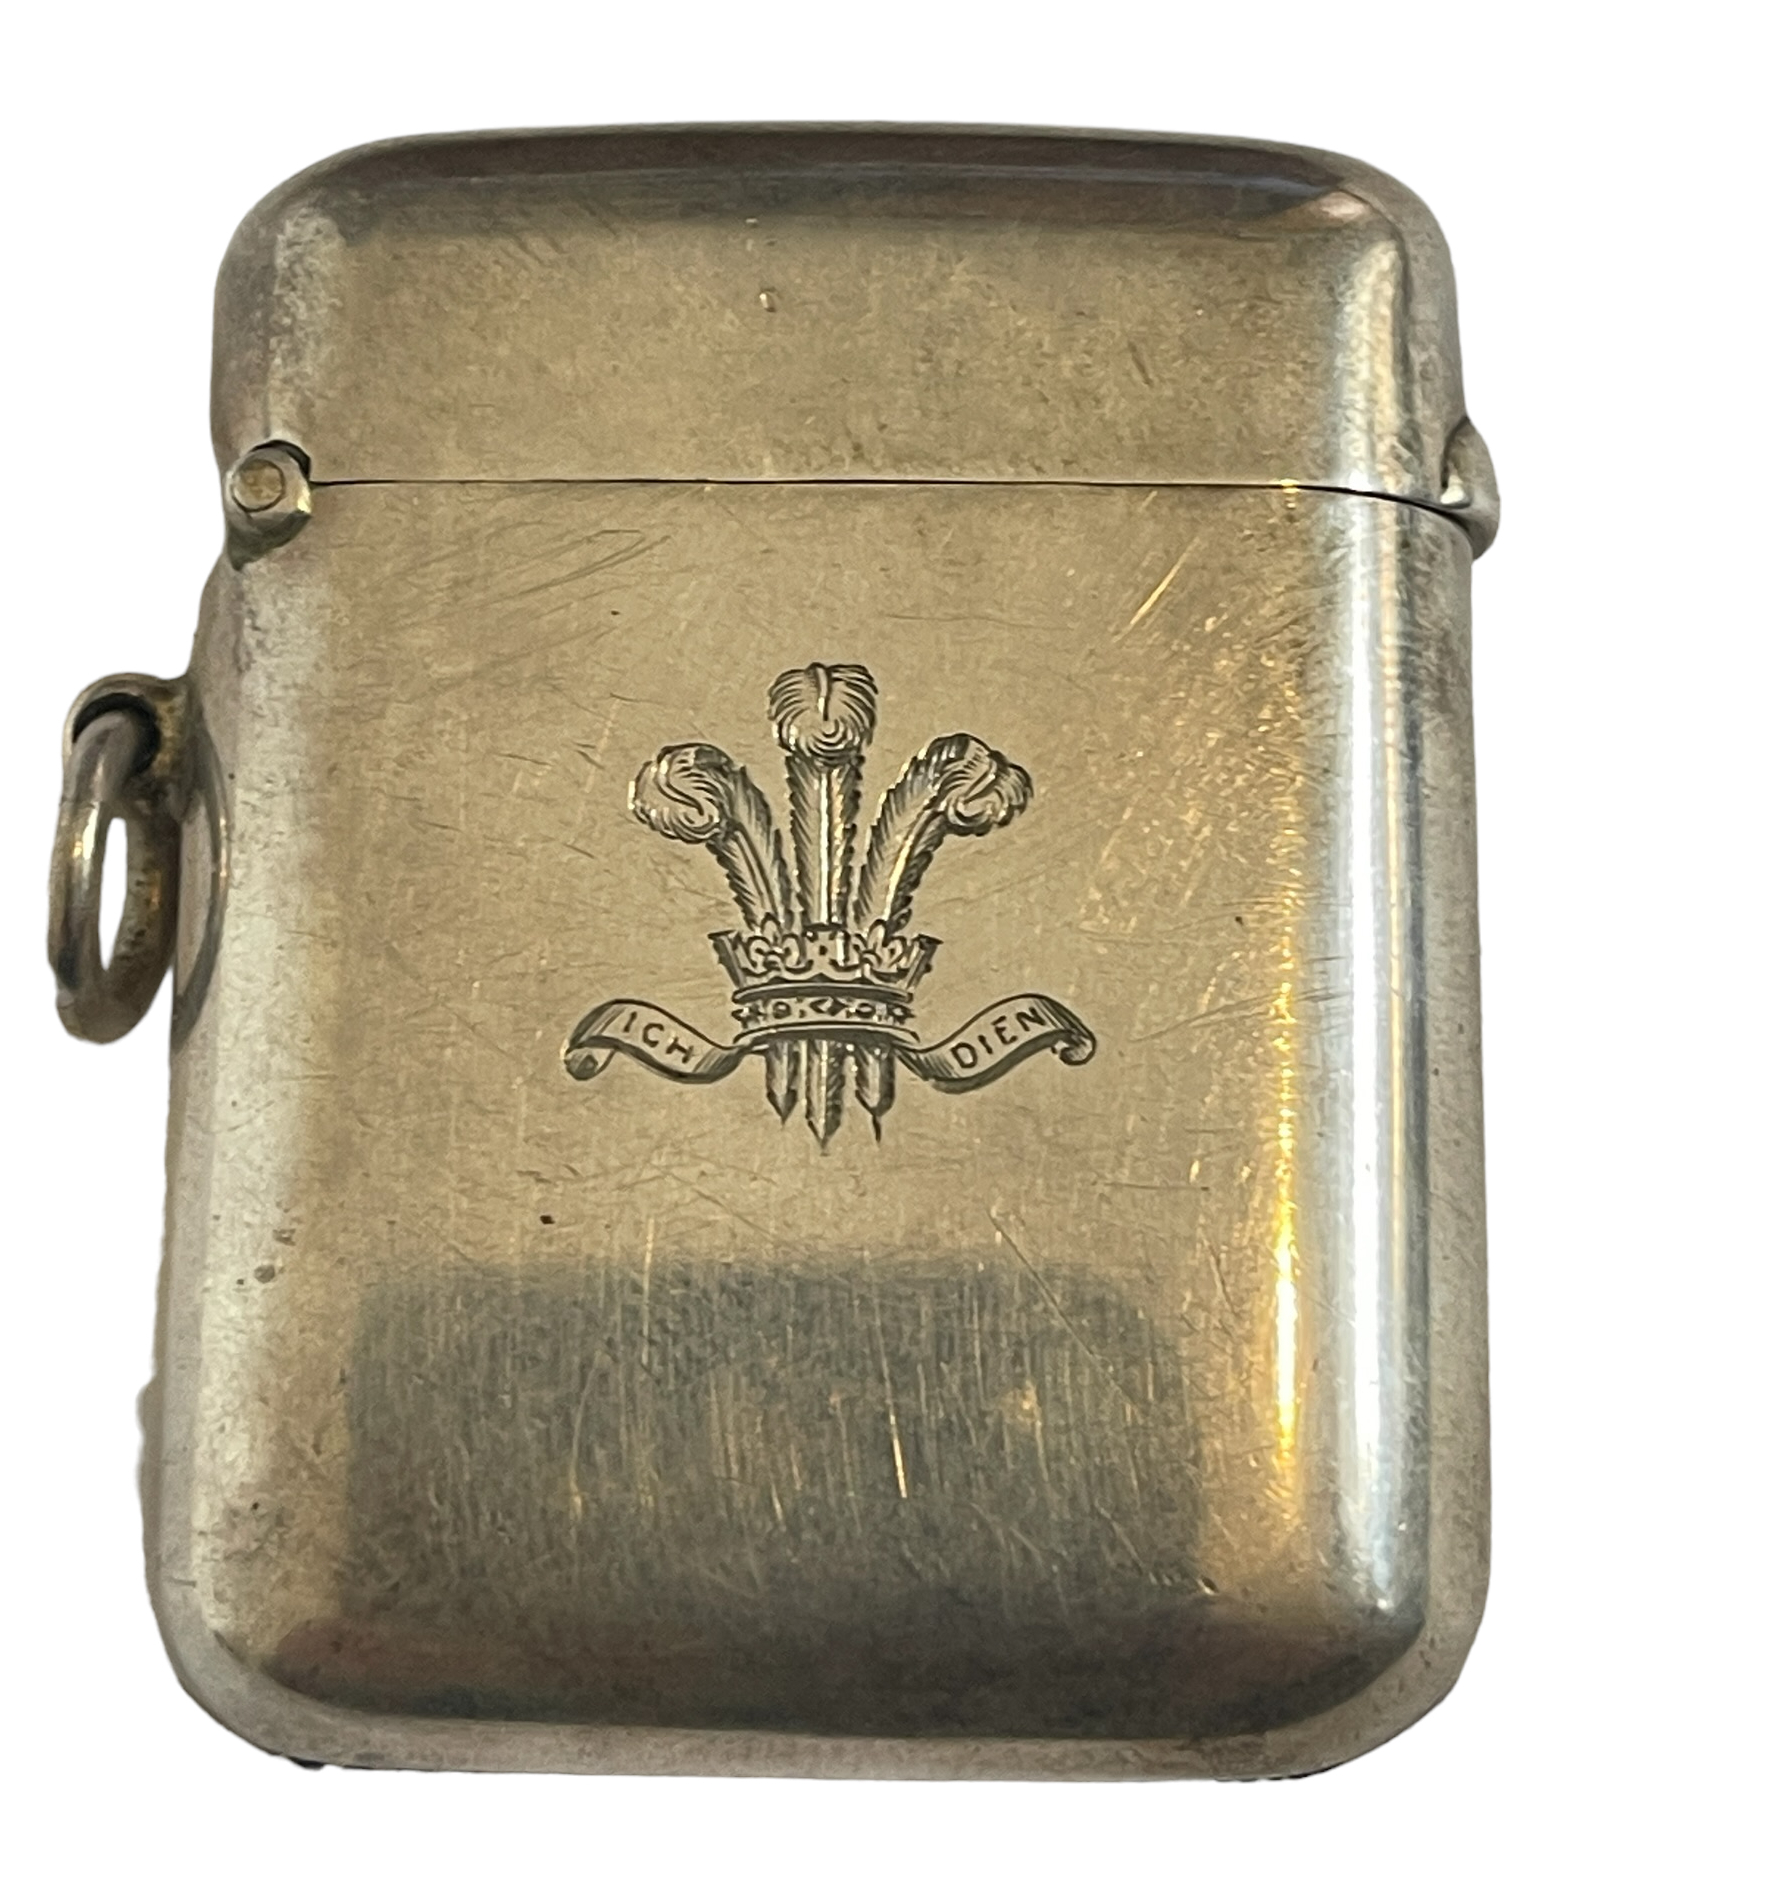 Alfred Clark New Bond St London Prince of Wales Feathers Cypher Boxed Vesta Case. - Image 4 of 13